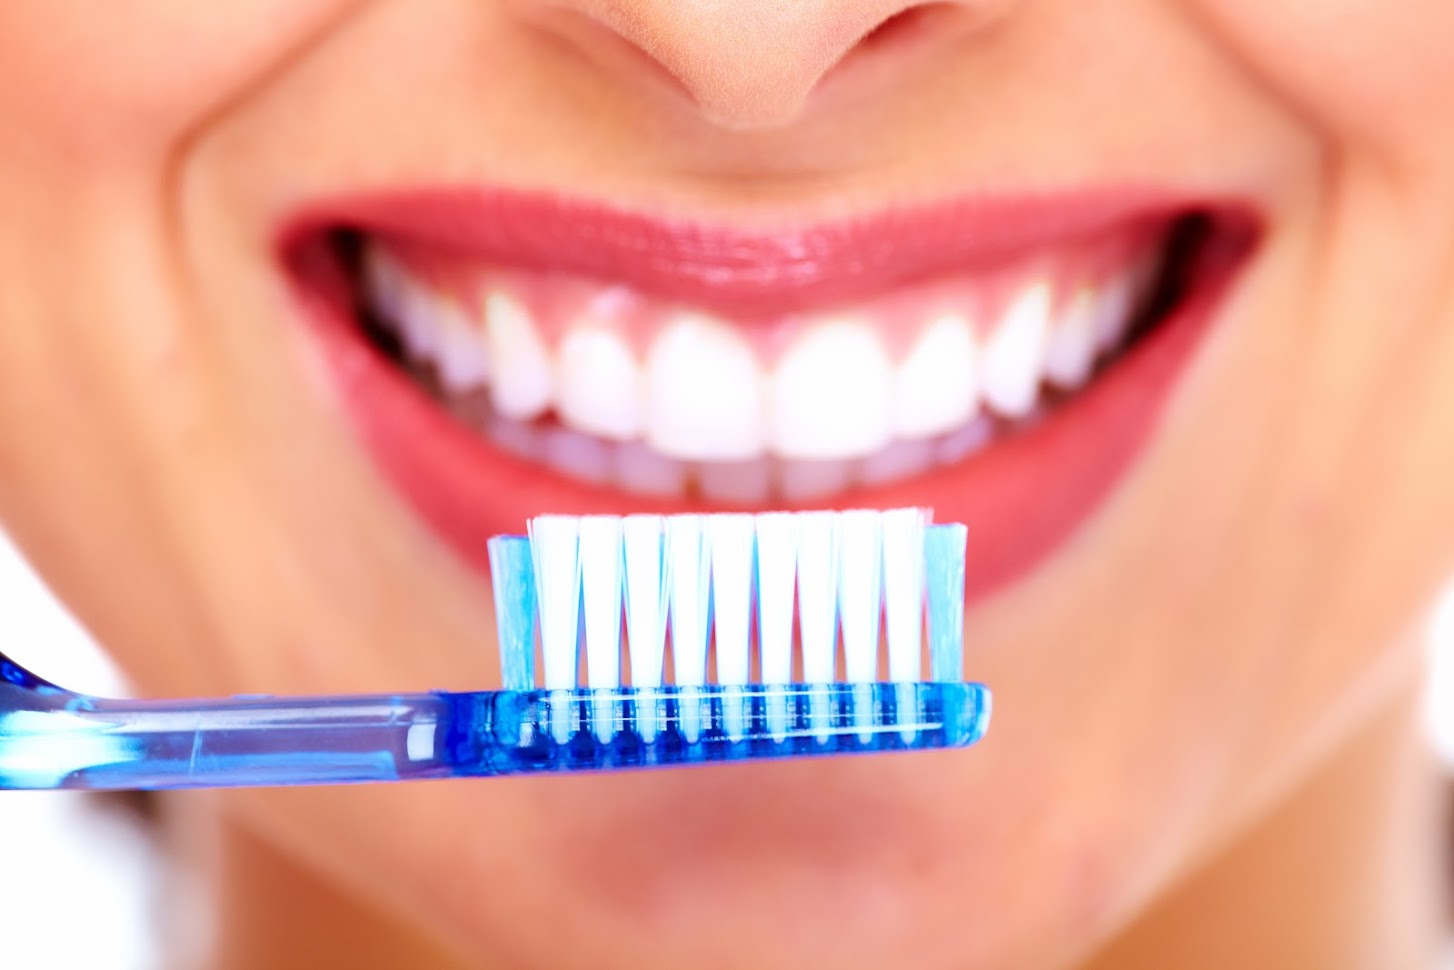 This is the image for the news article titled Is Your Toothbrush Dirty?